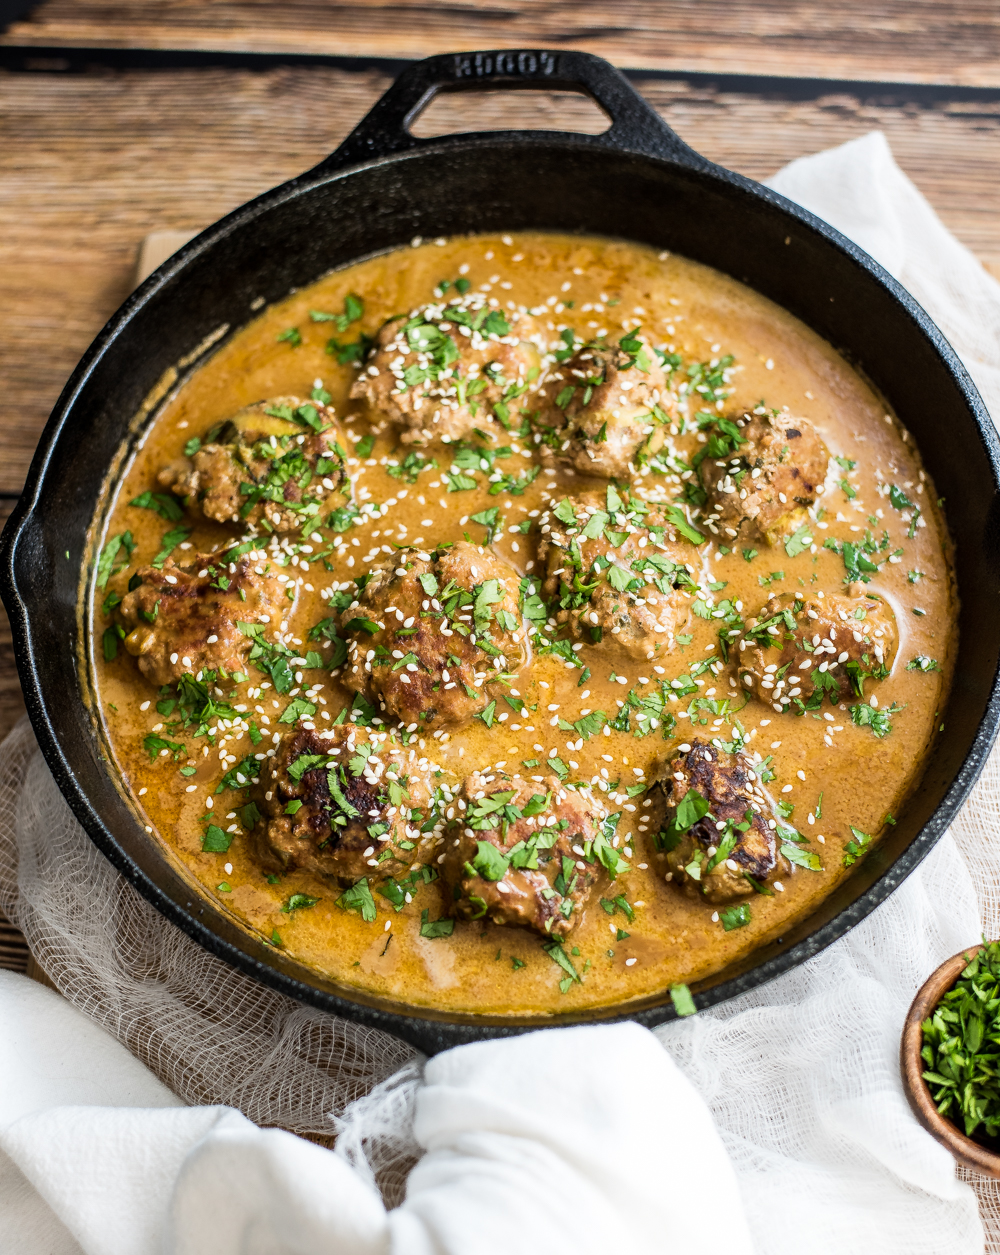 One pan turkey zucchini meatballs in Bangkok peanut sauce™ is the perfect weeknight meal. It is popping with texture and doesn't lack in flavor thanks to House of Tsang's Bangkok Peanut Sauce™!